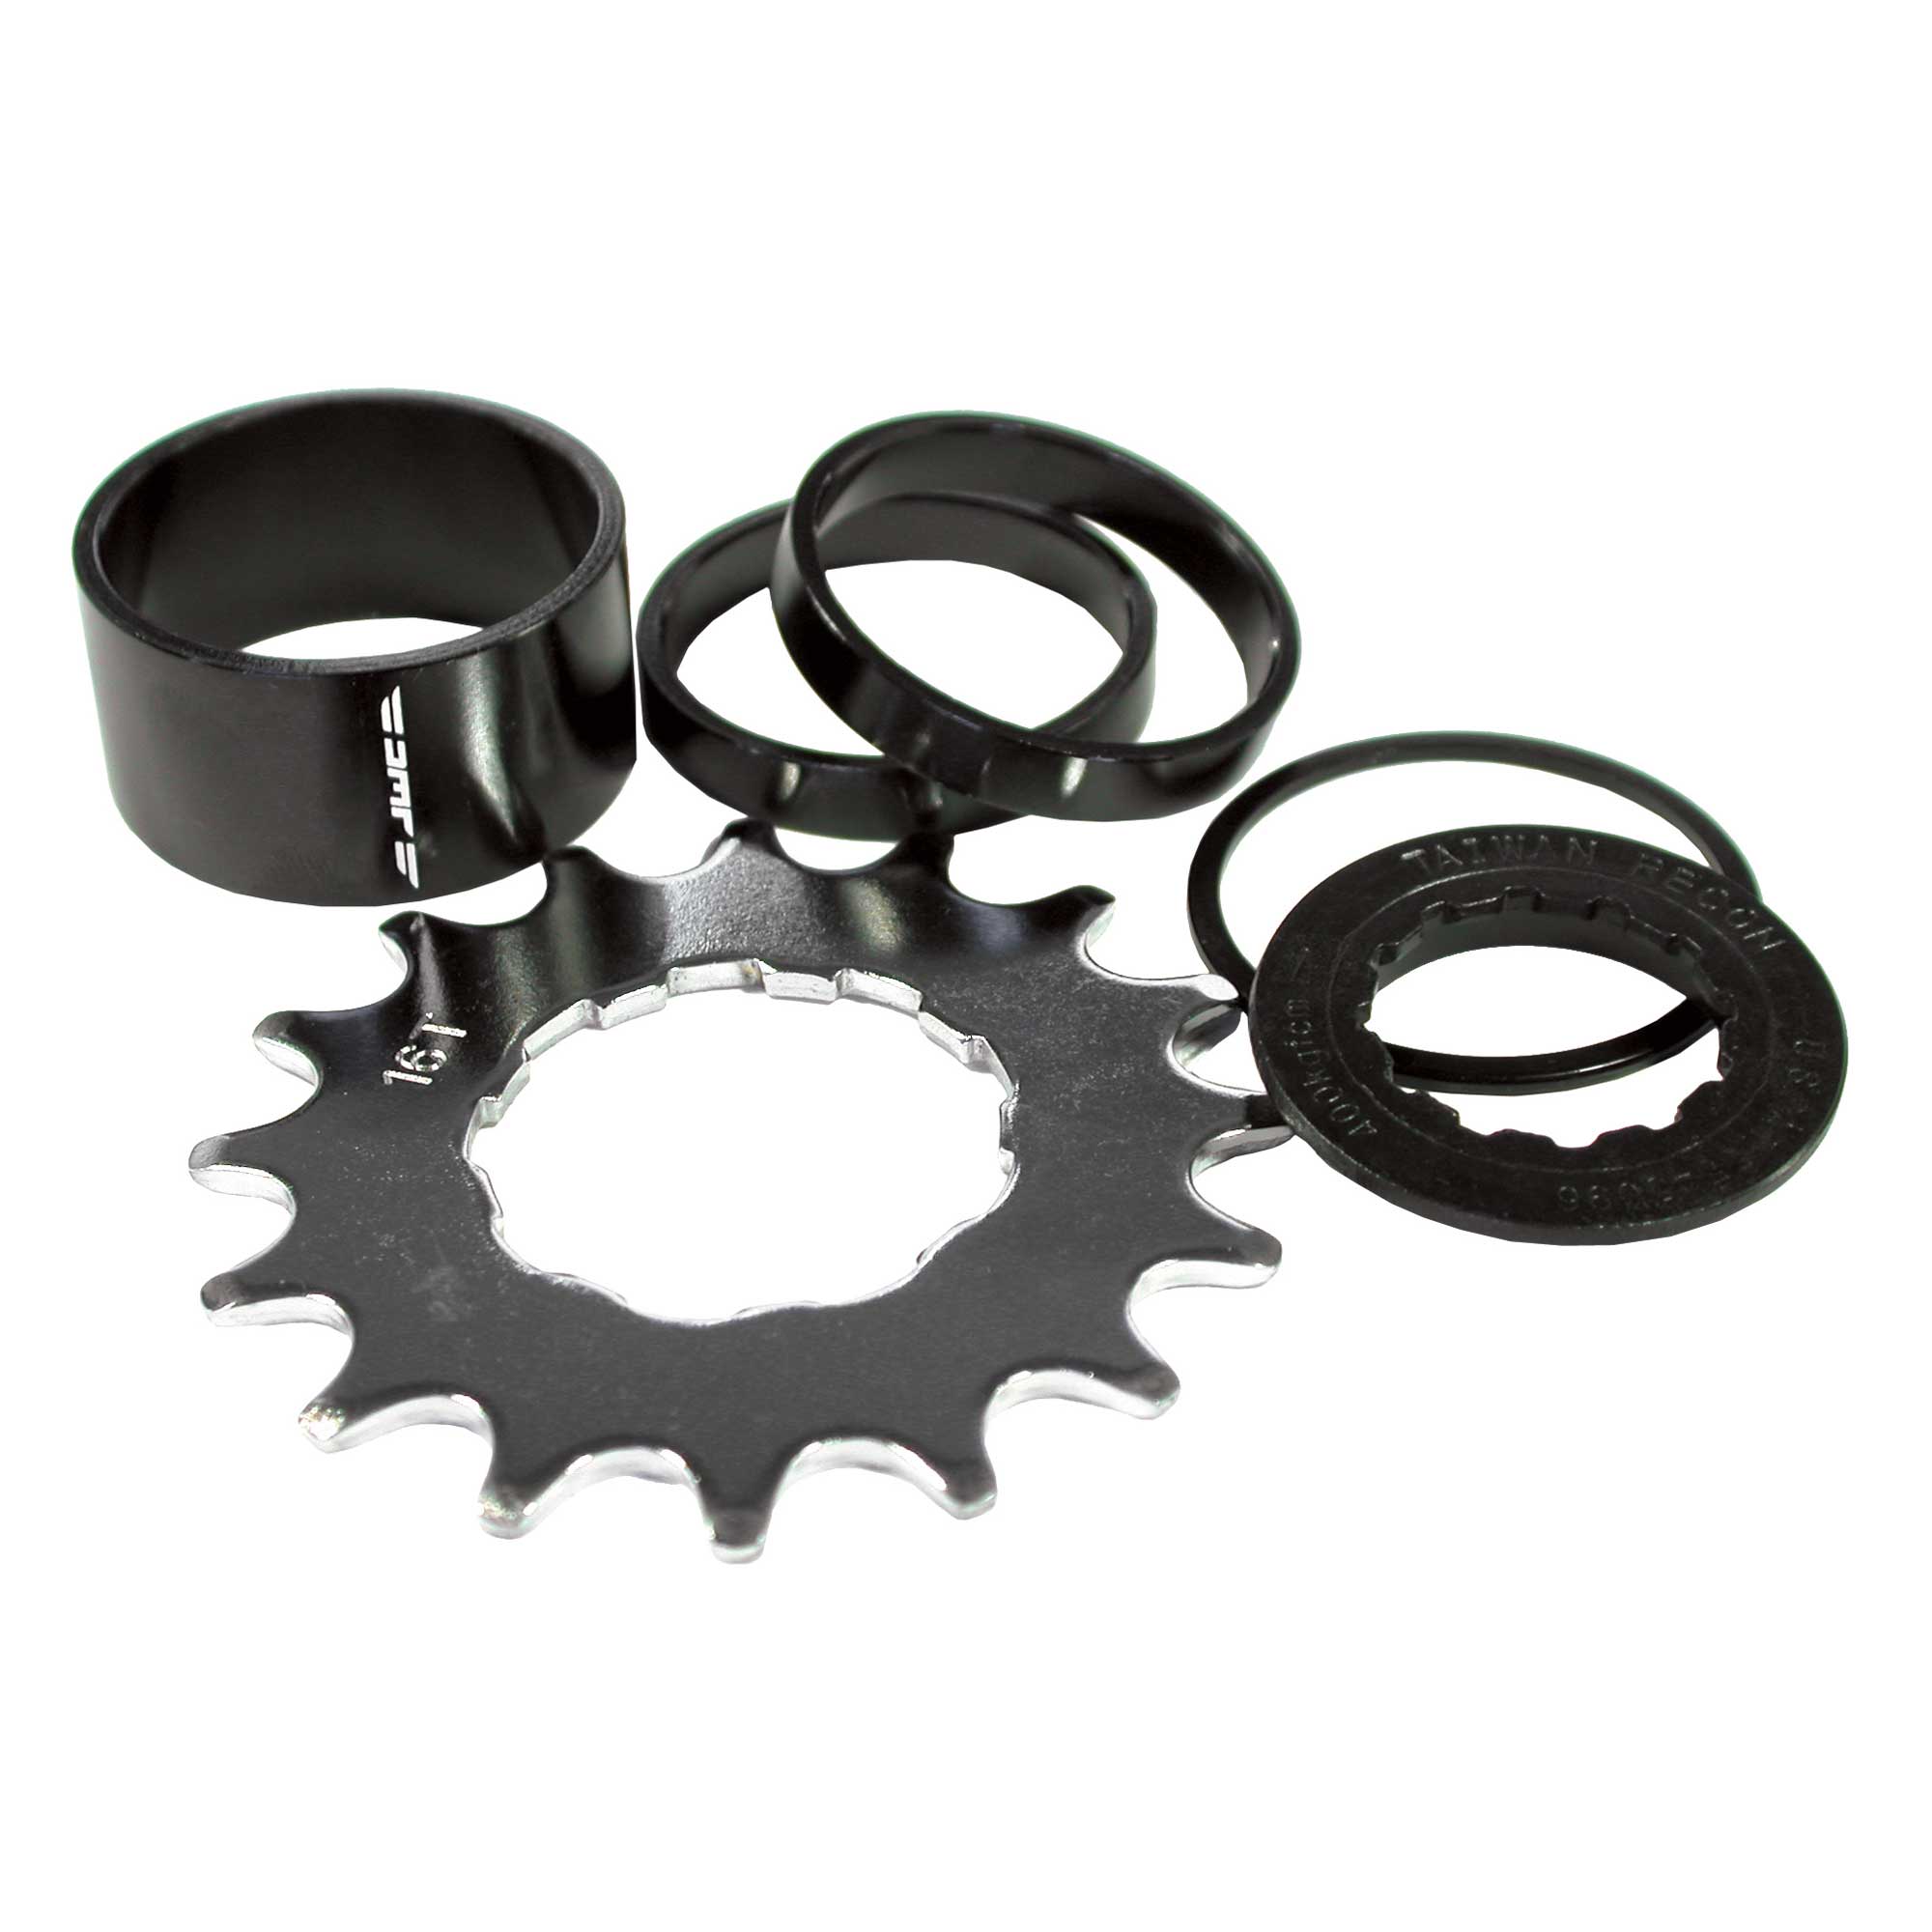 gear kit for cycle